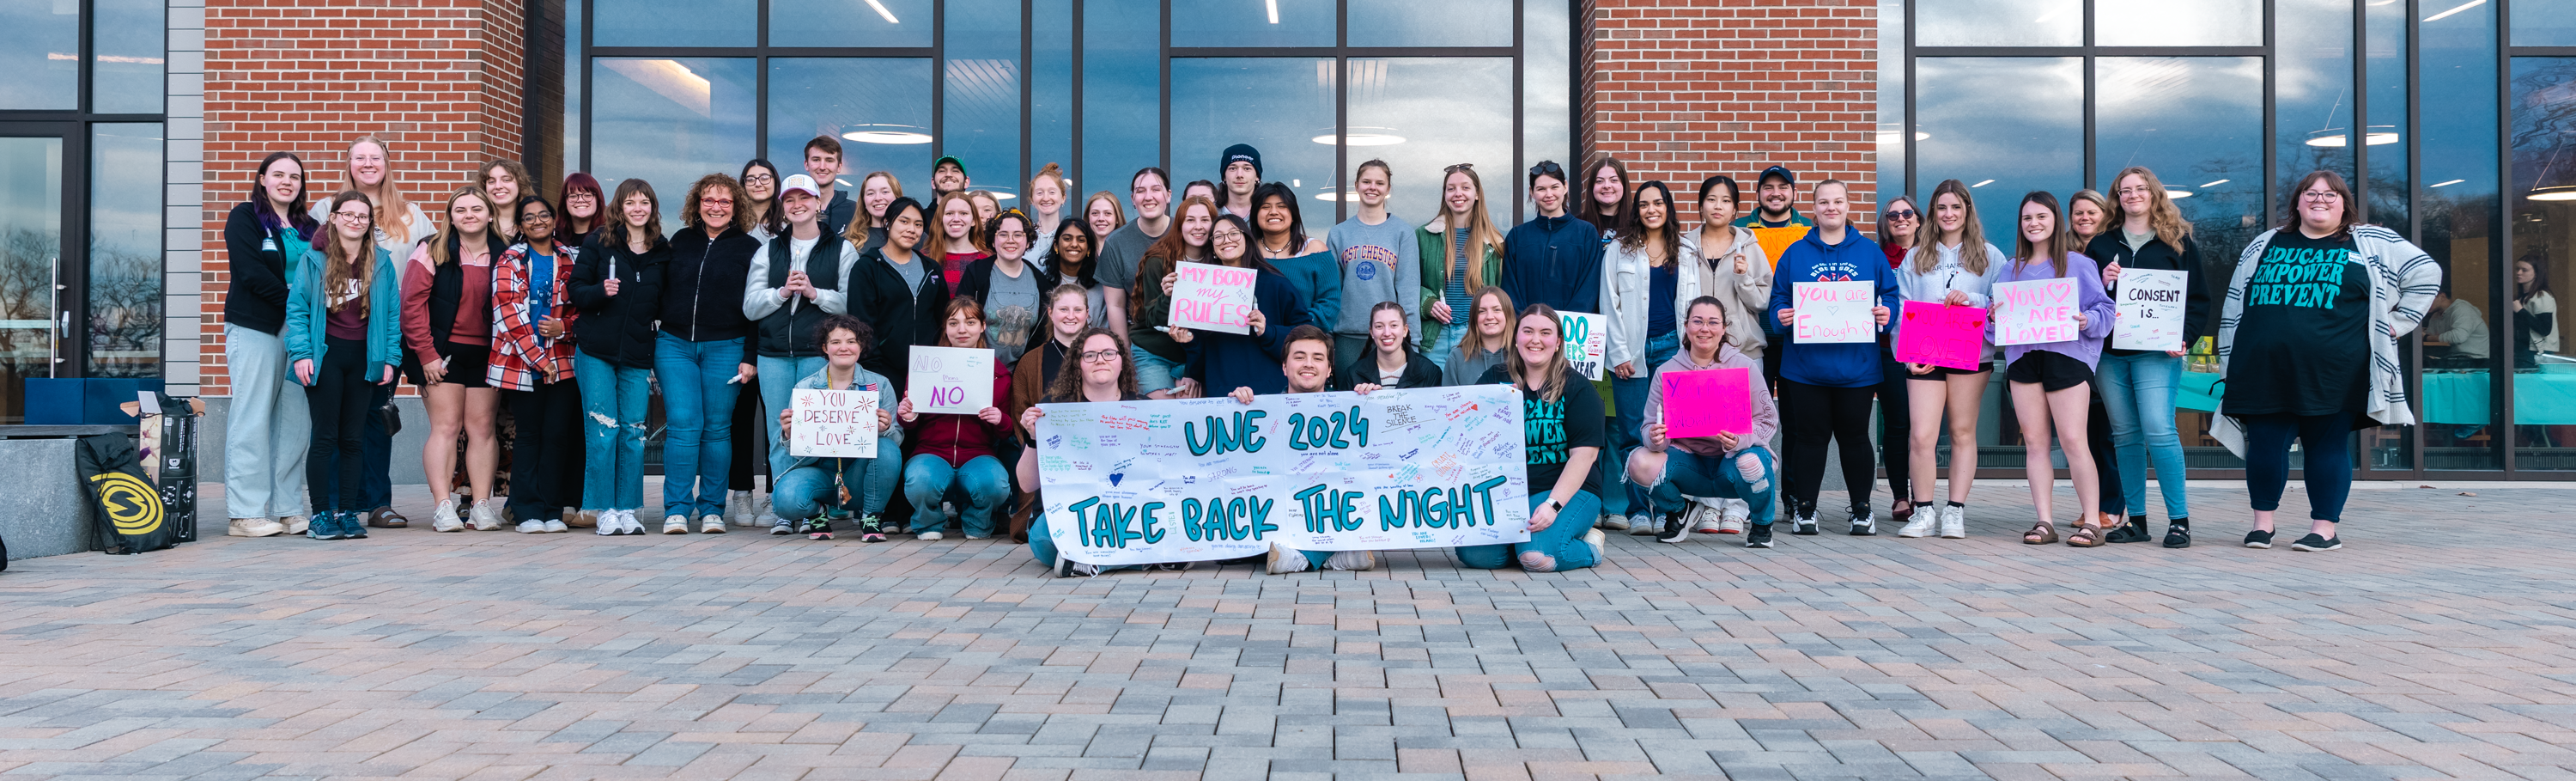 A group photo from the Take Back the Night event